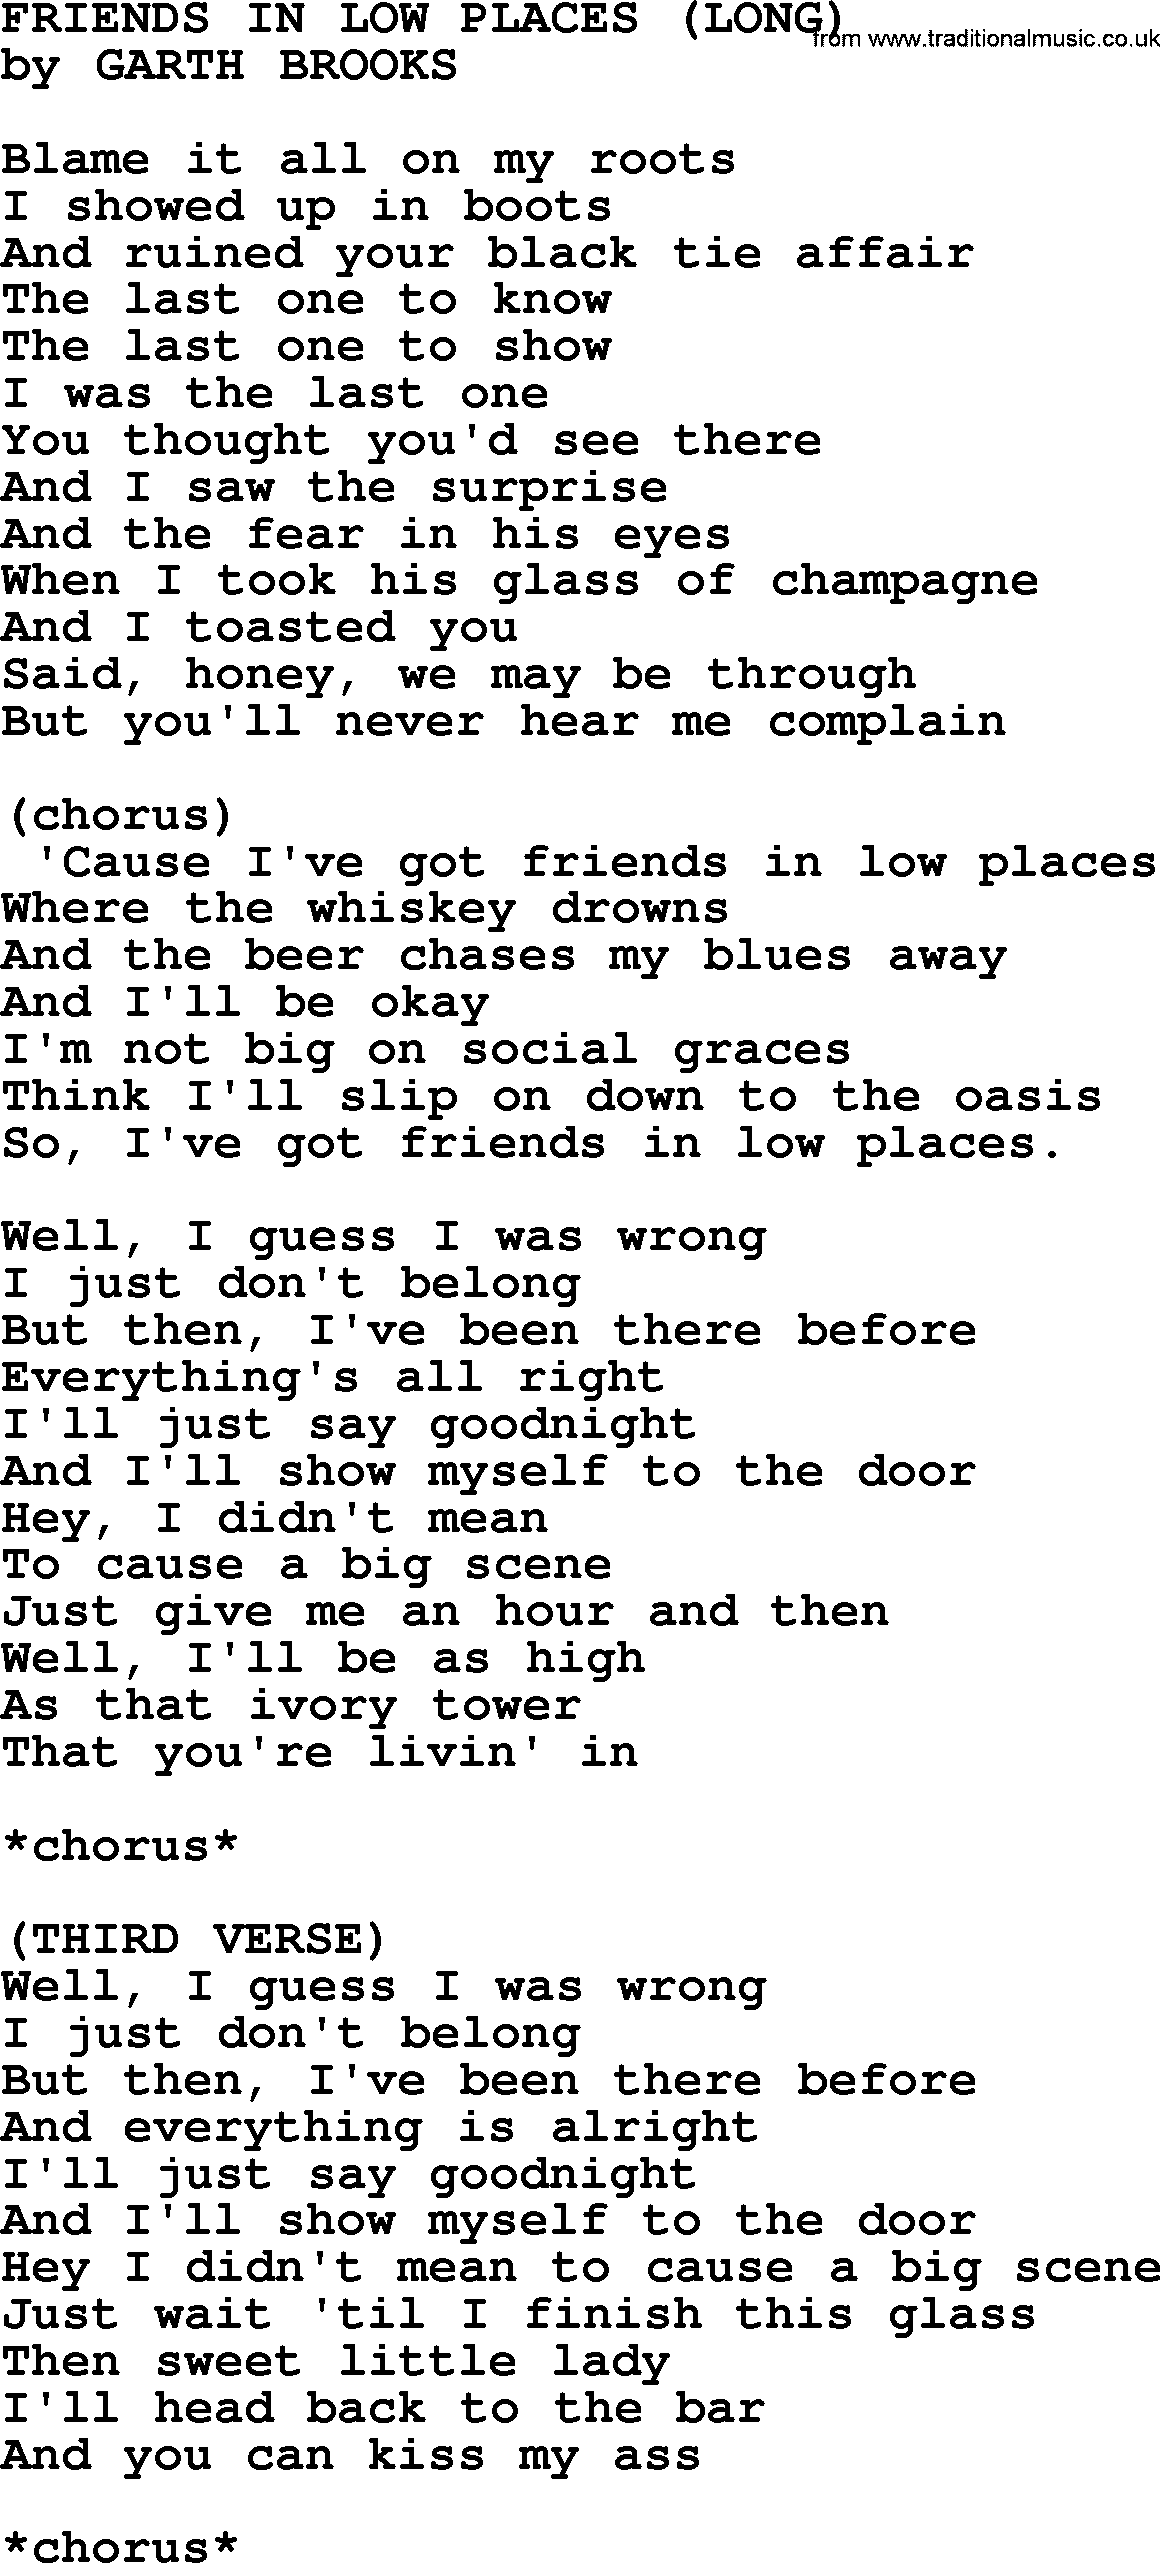 Garth Brooks song: Friends In Low Places (long), lyrics